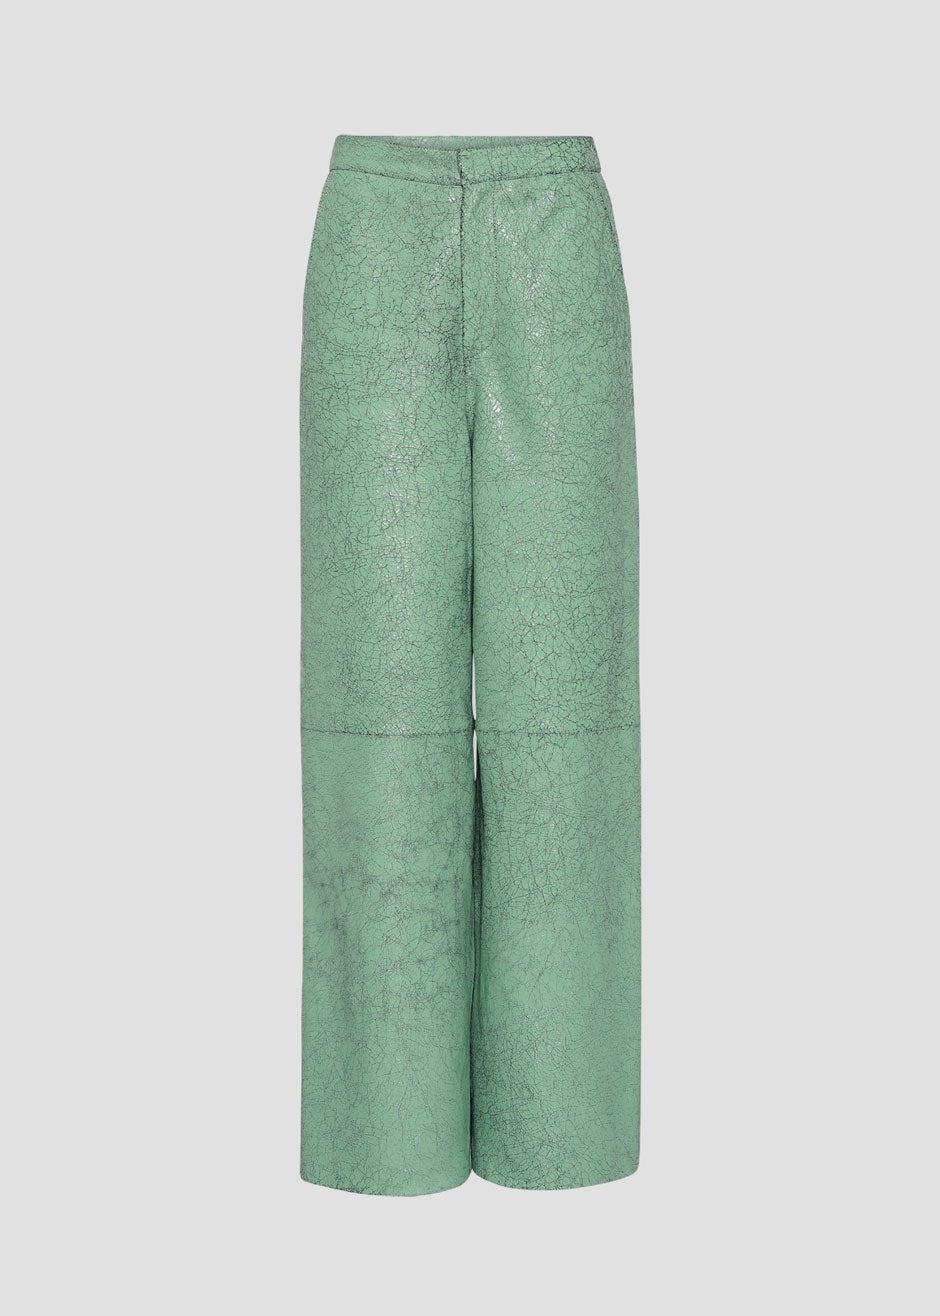 REMAIN Luma Leather Pants - Green Spruce – The Frankie Shop